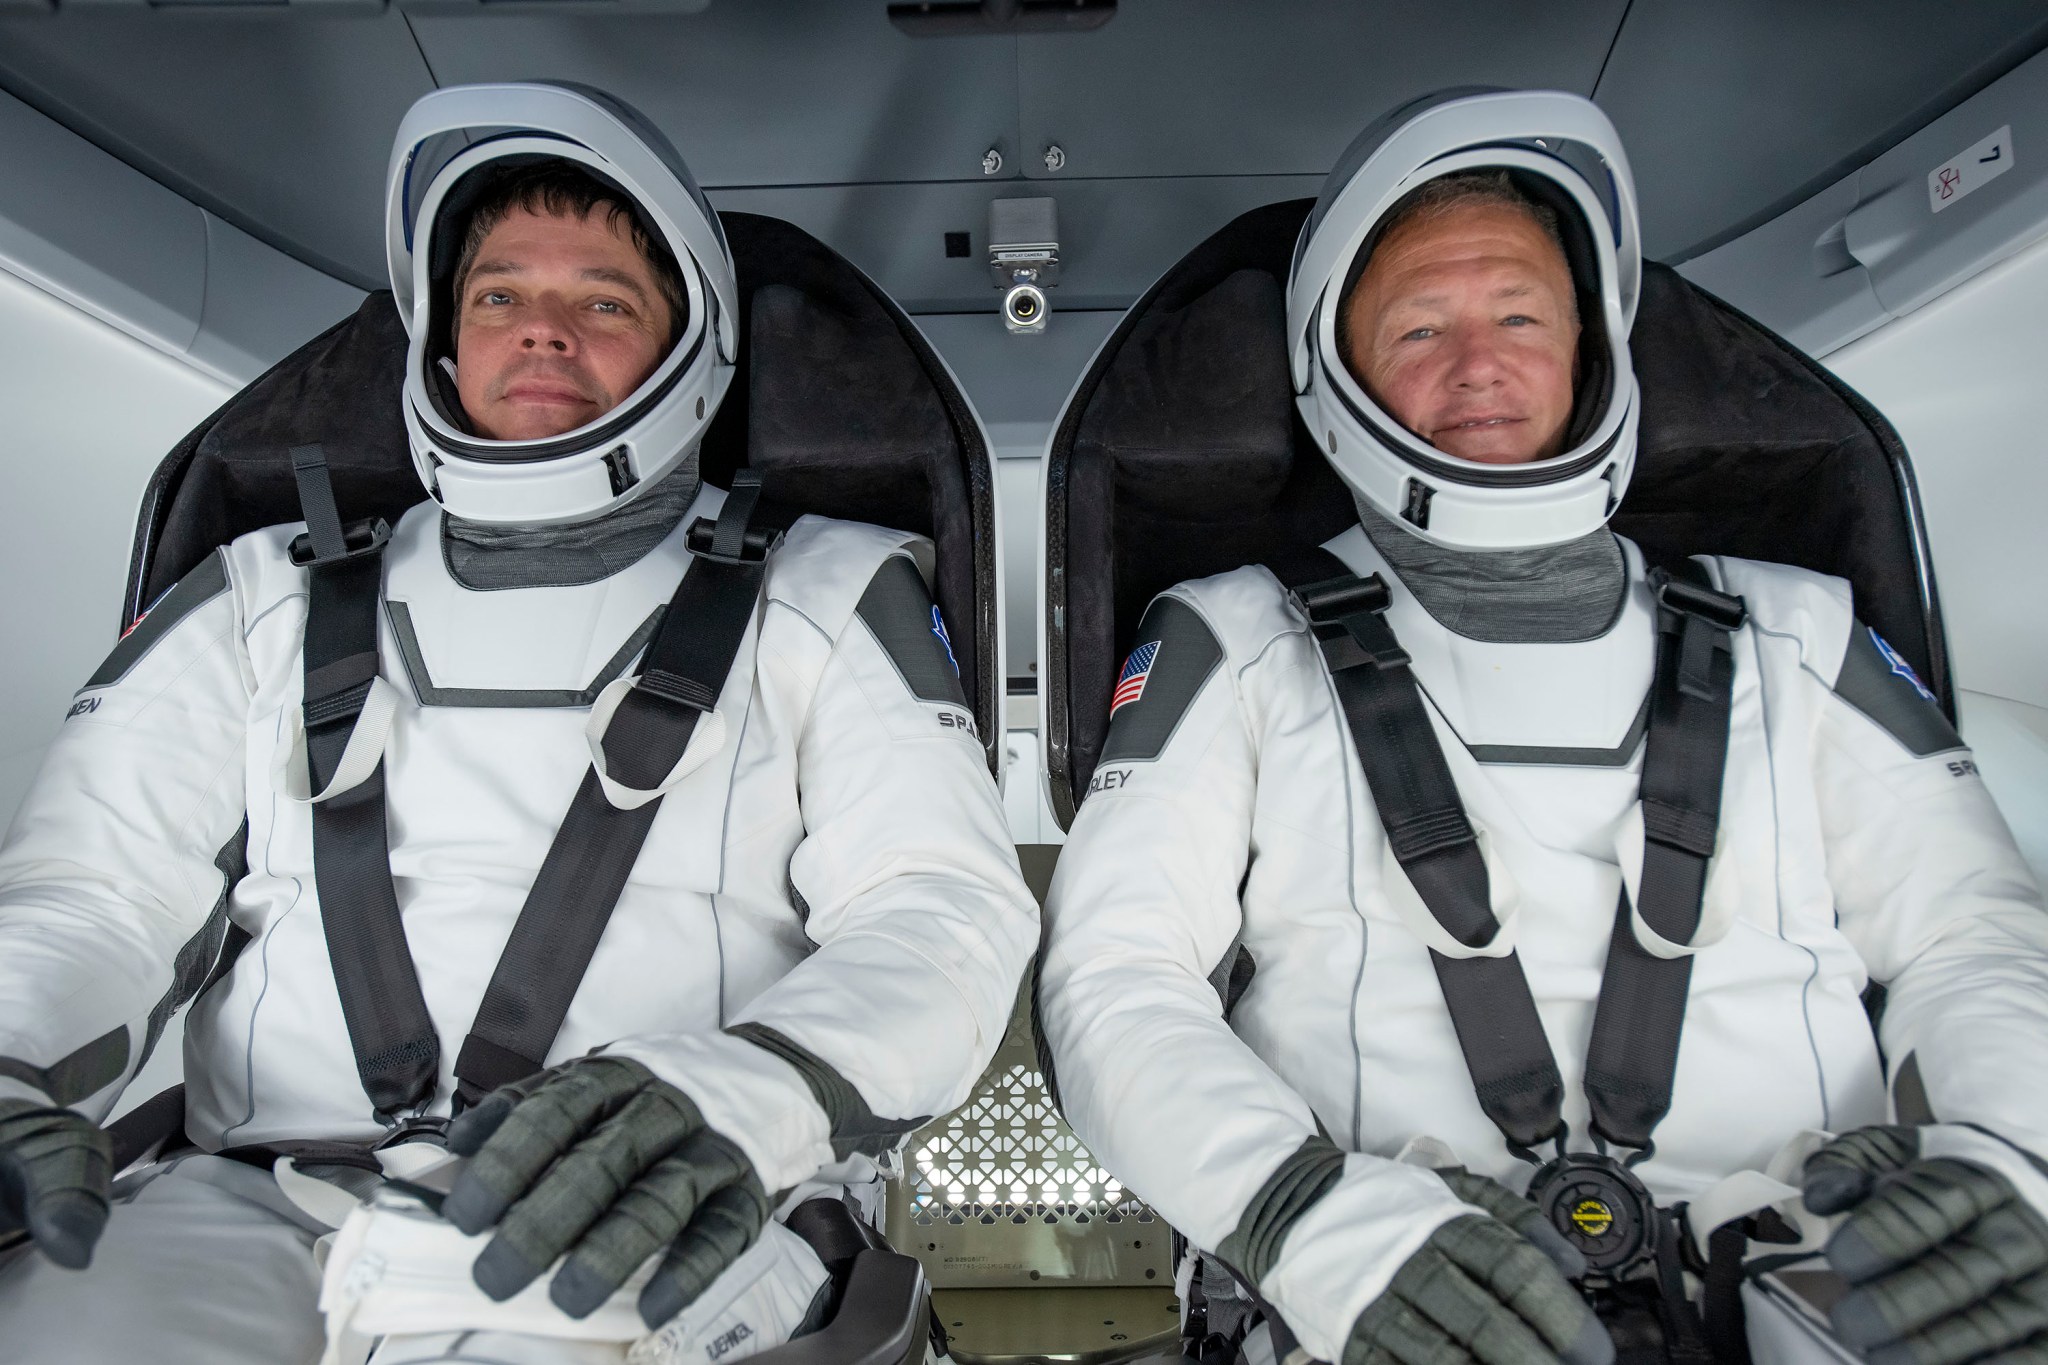 NASA astronauts Behnken and Hurley participated in Commerical Crew Program first flight test.